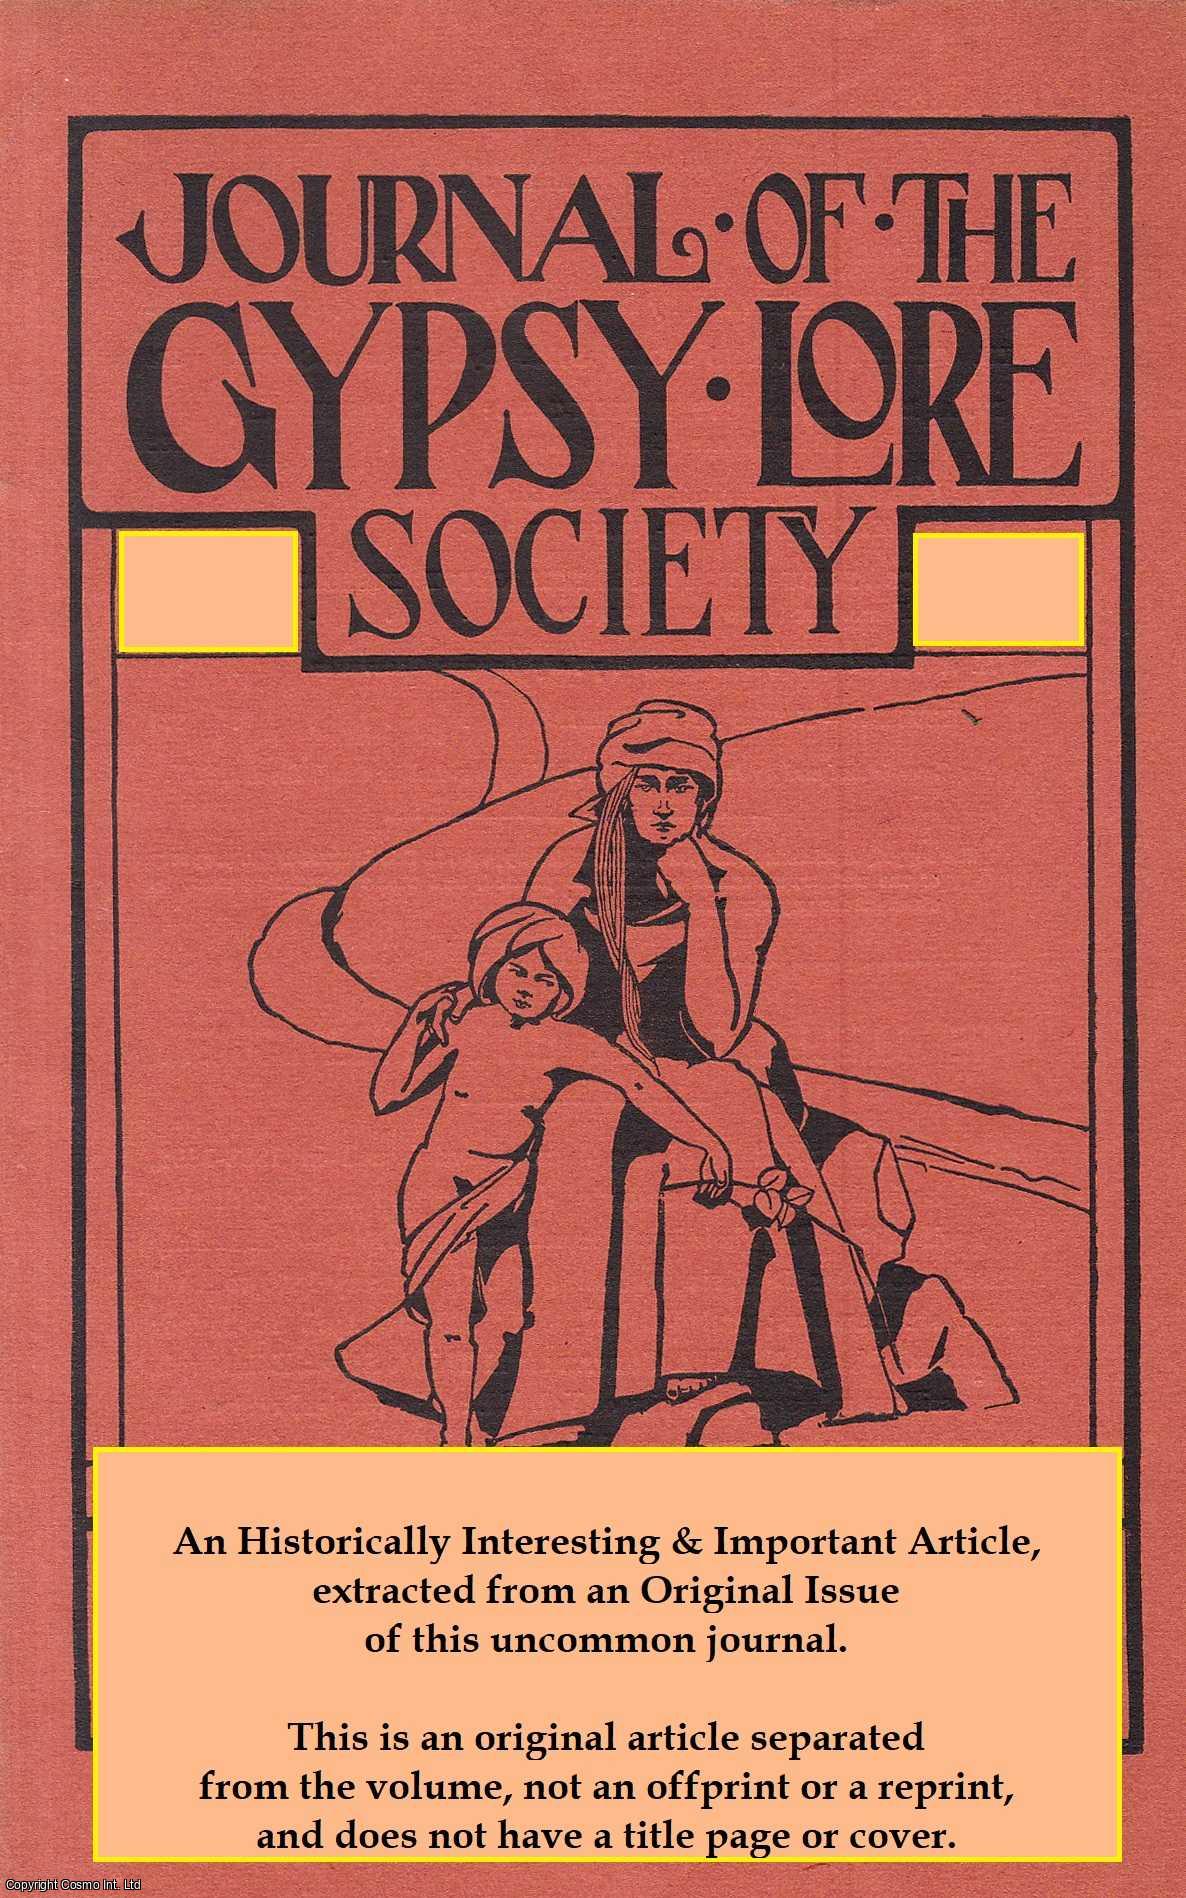 Mateo Maximoff - The Kalderash of Montreuil-sous-Bois. An uncommon original article from the Journal of the Gypsy Lore Society, 1961.